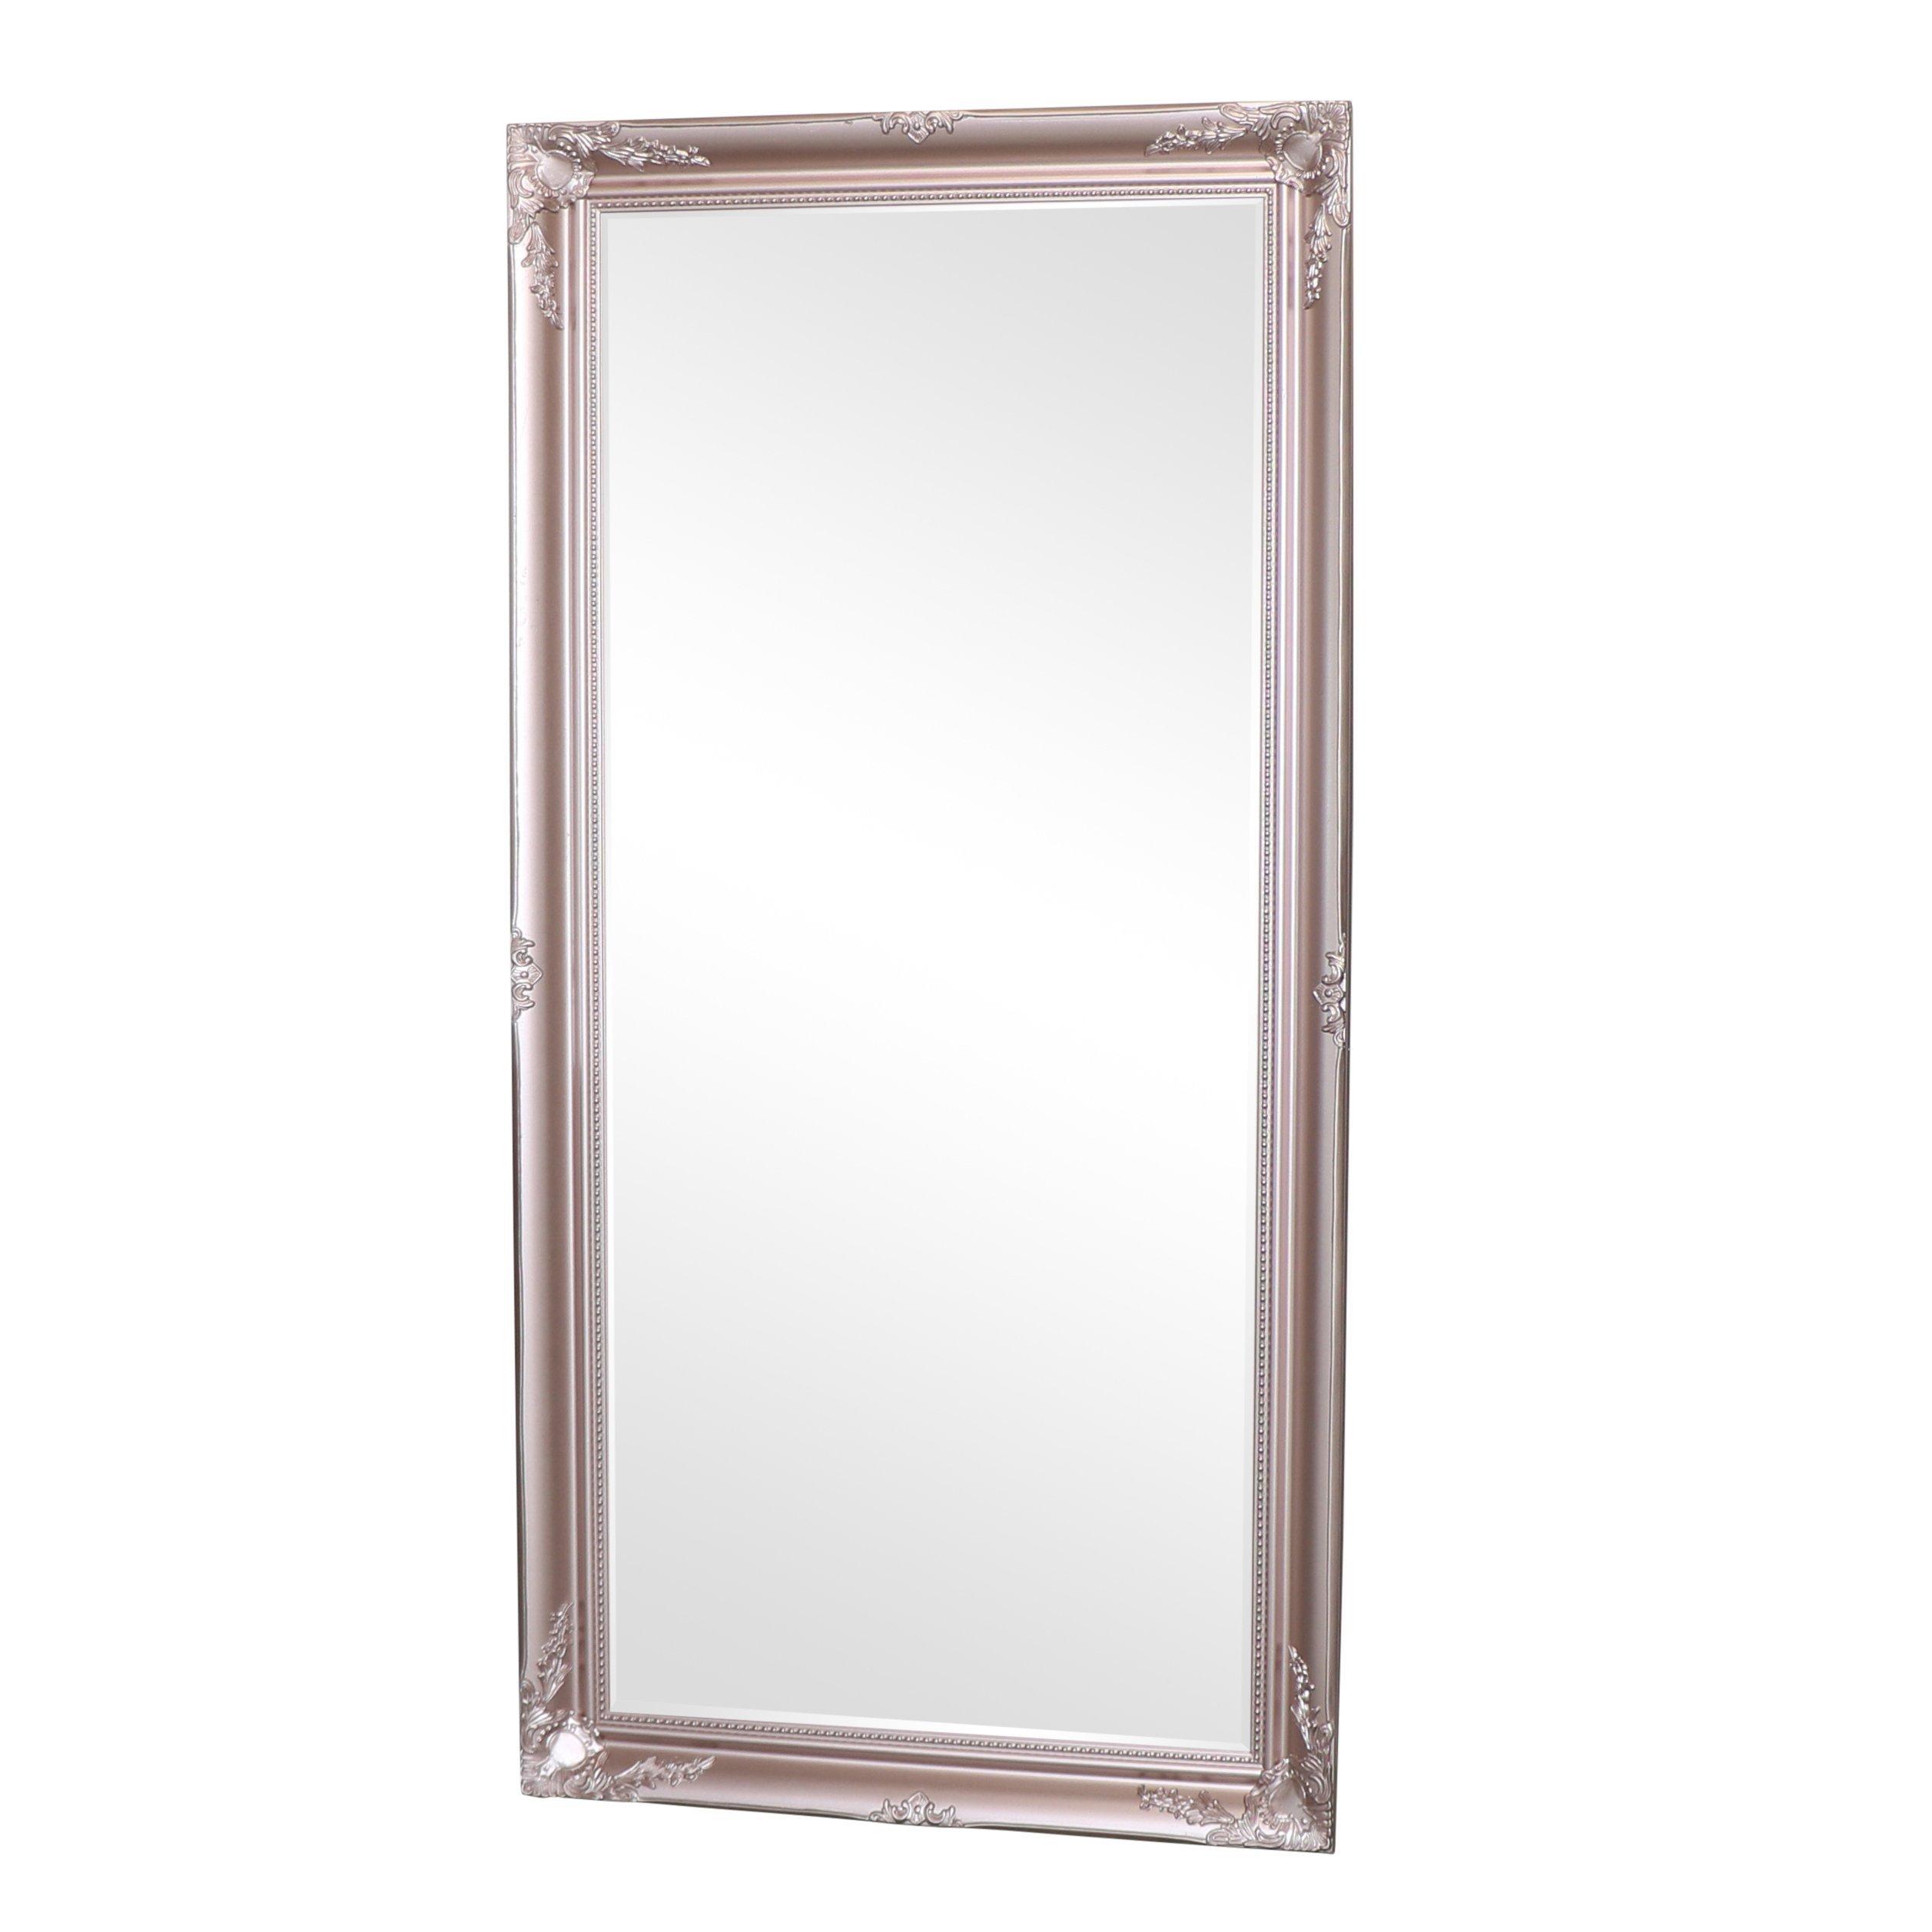 Large Rose Gold Pink Ornate Wall/Floor Mirror 78cm X 158cm